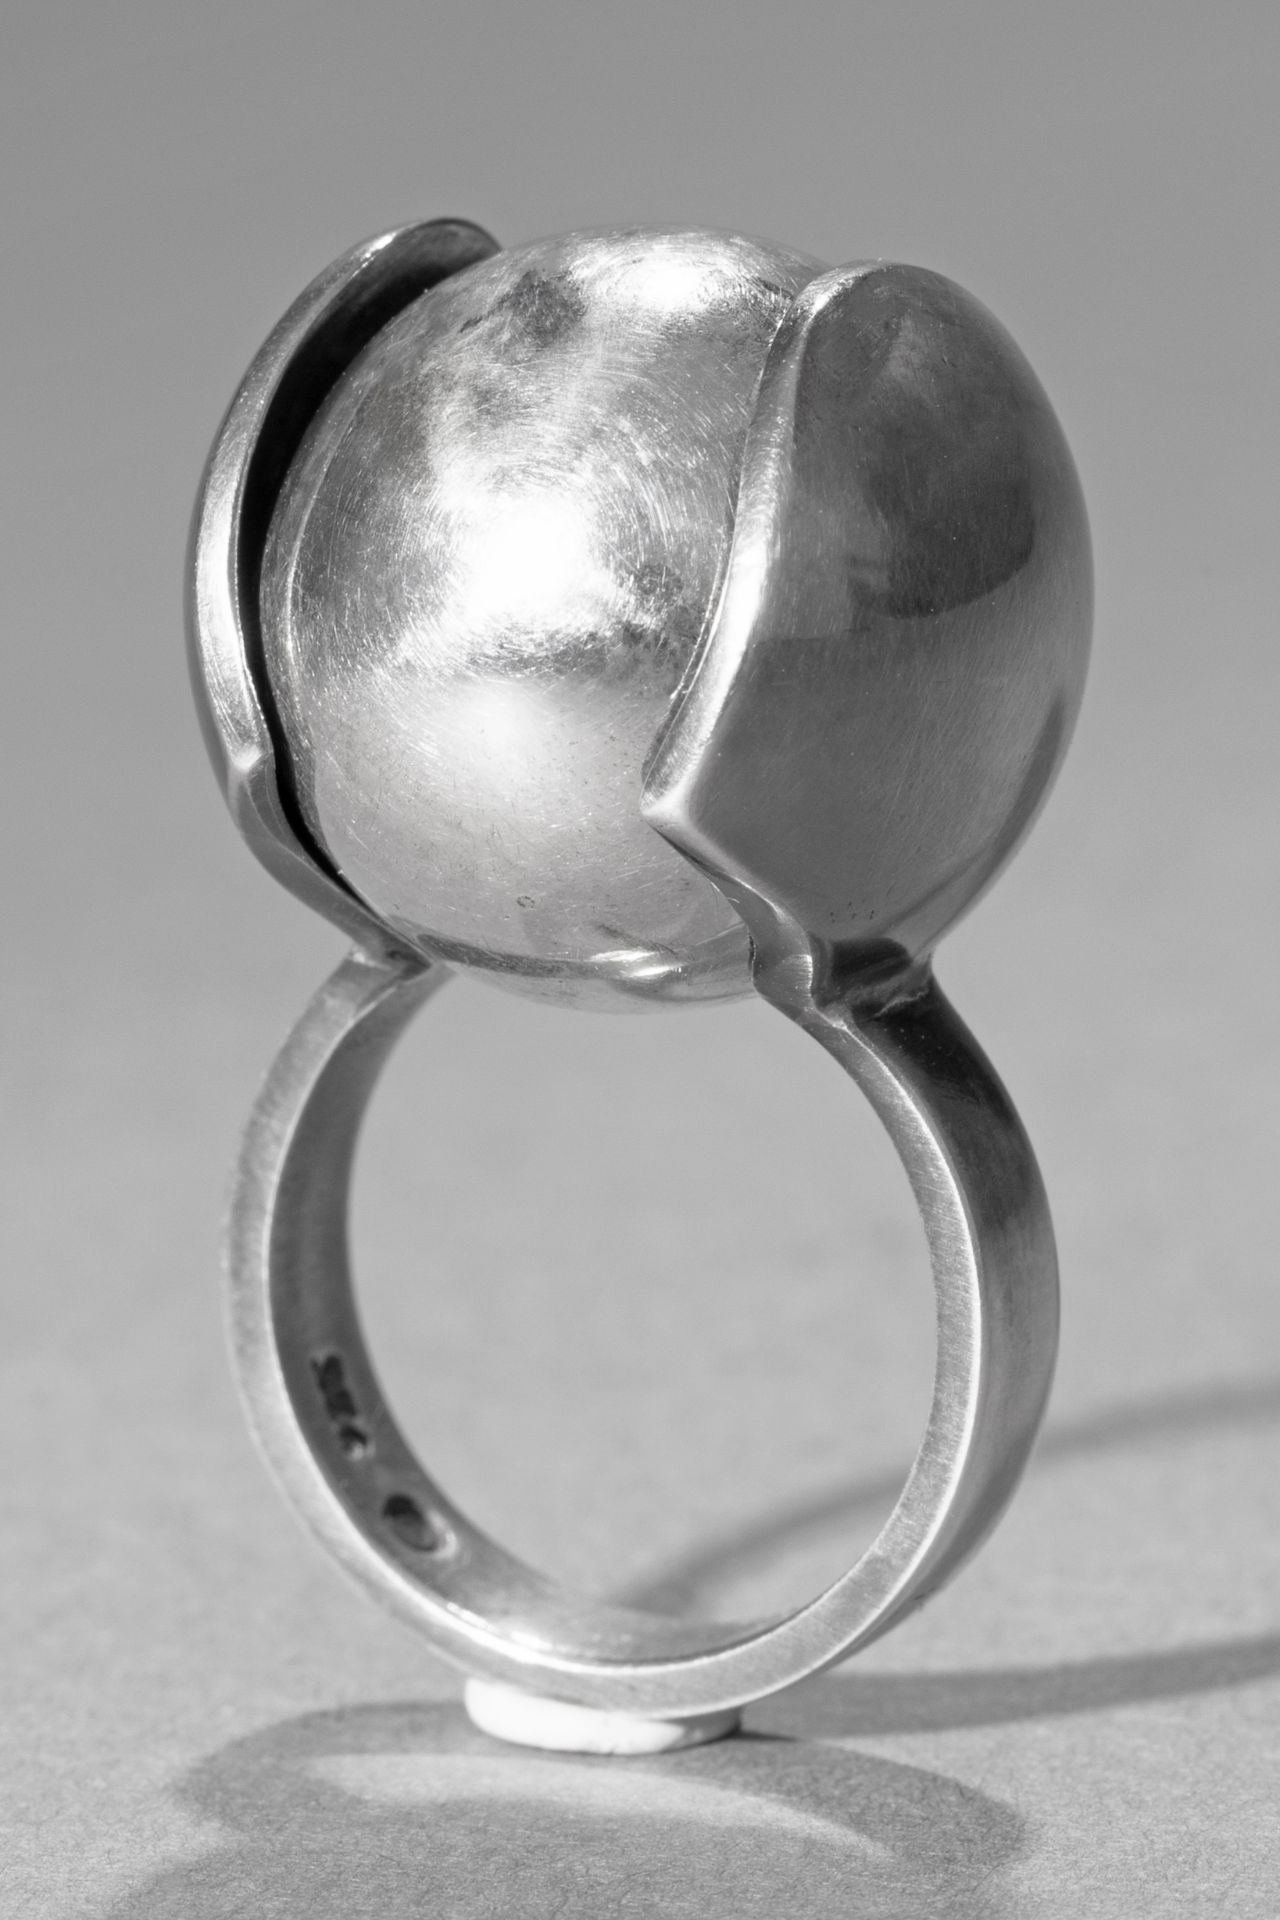 Herta & Friedrich Gebhart, necklace and ring - Image 4 of 5